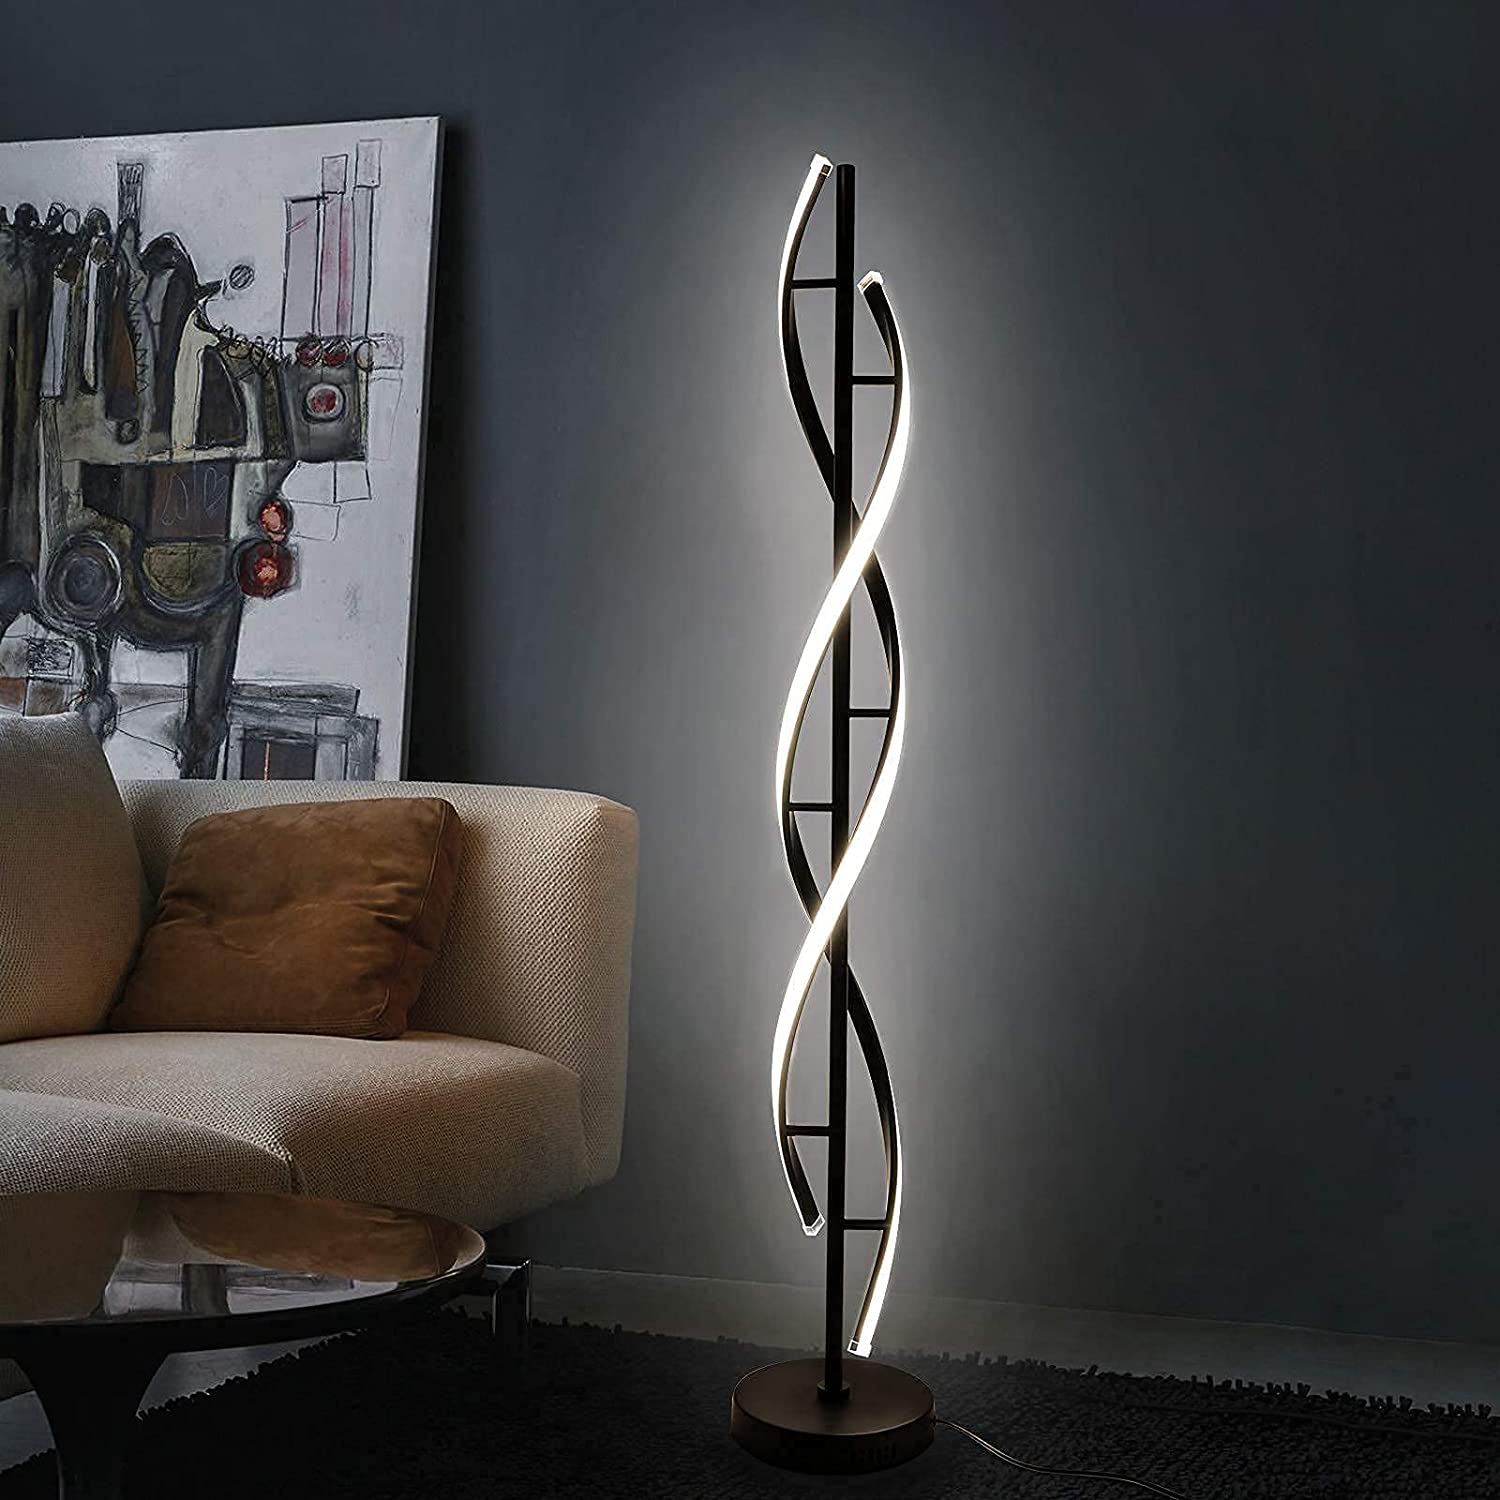 IYUNXI LED Modern Spiral Floor Lamp with Remote Control